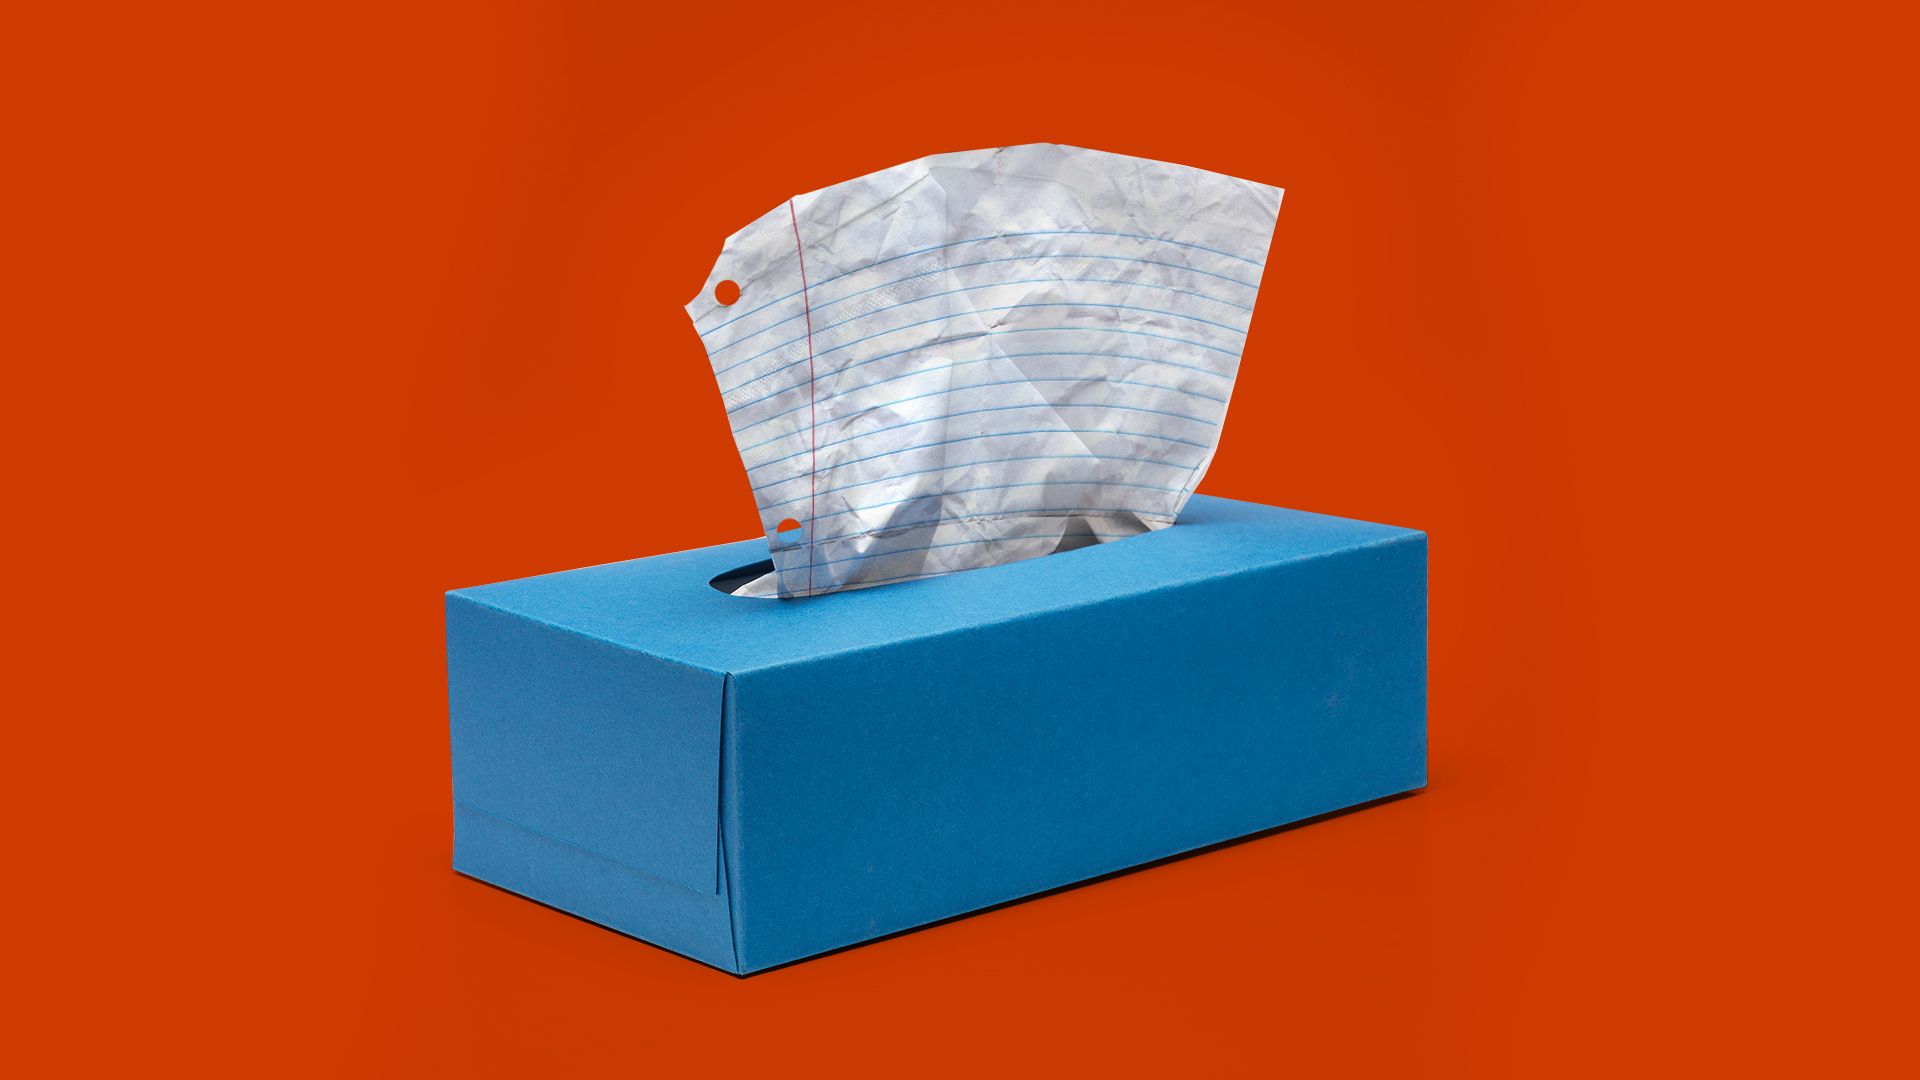 Illustration of a tissue box with ruled paper coming out instead of tissues.